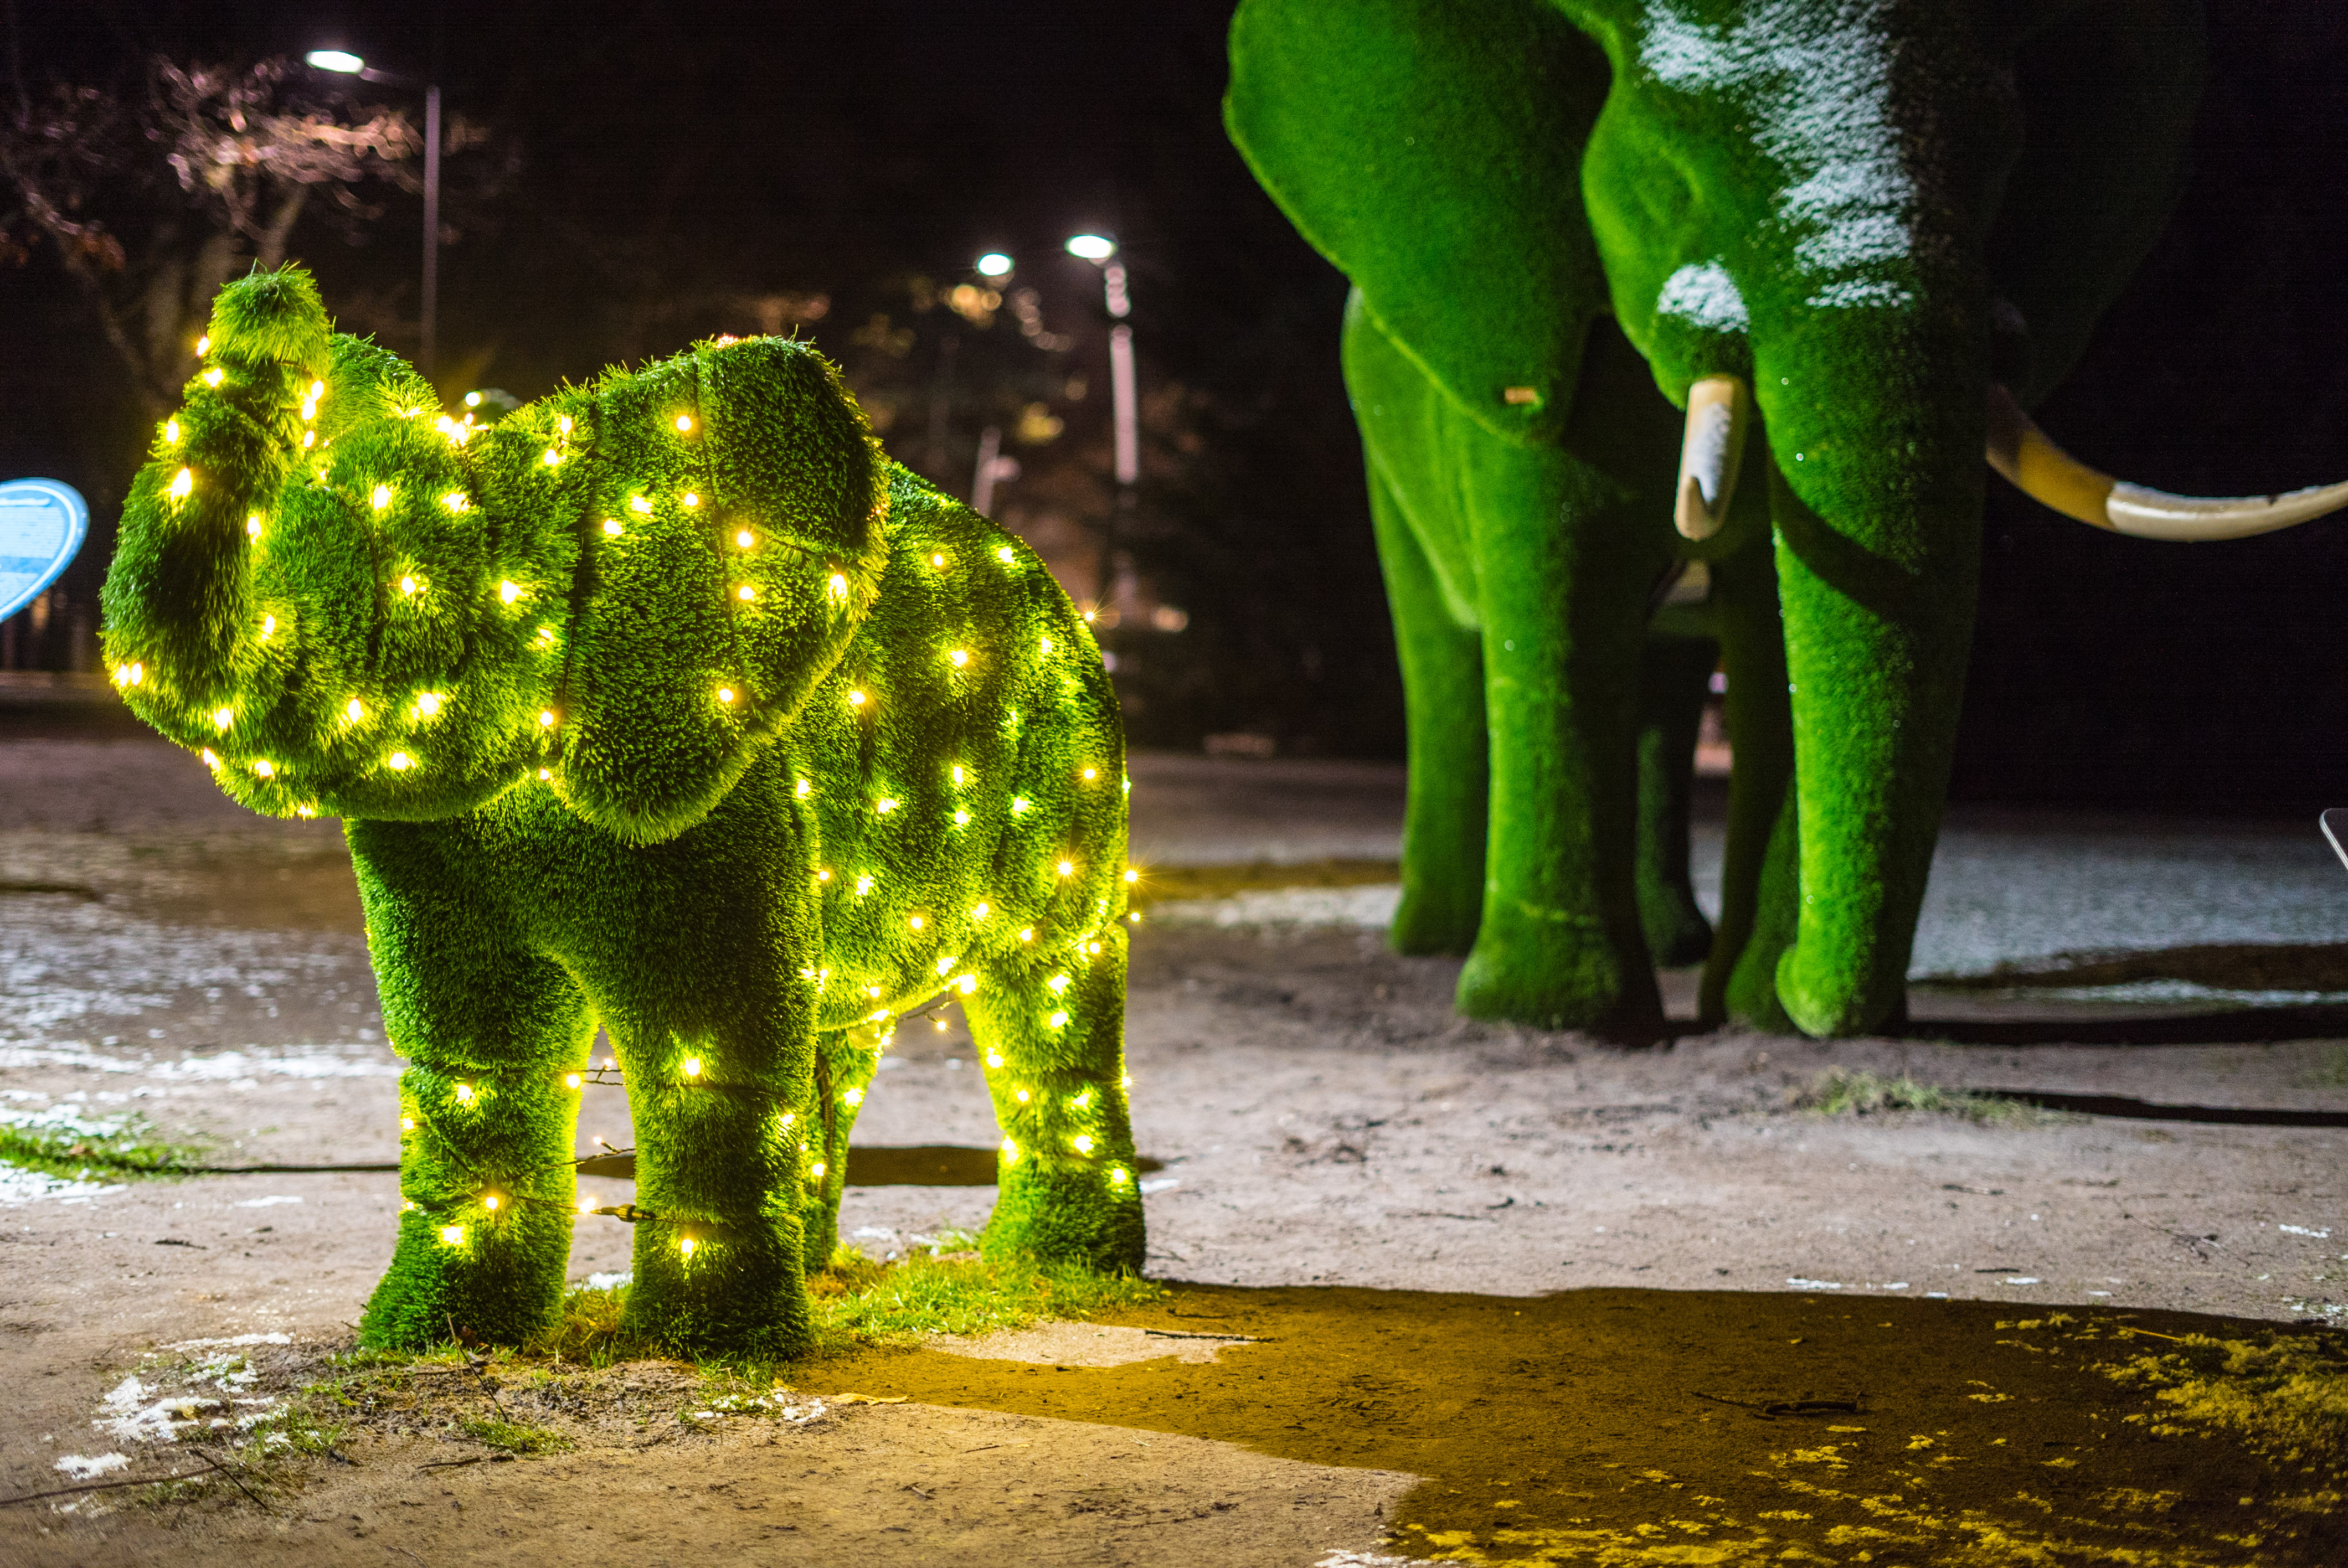 Elephant sculptures made out of grass. A big elephant and a small one which has fairylights around it.